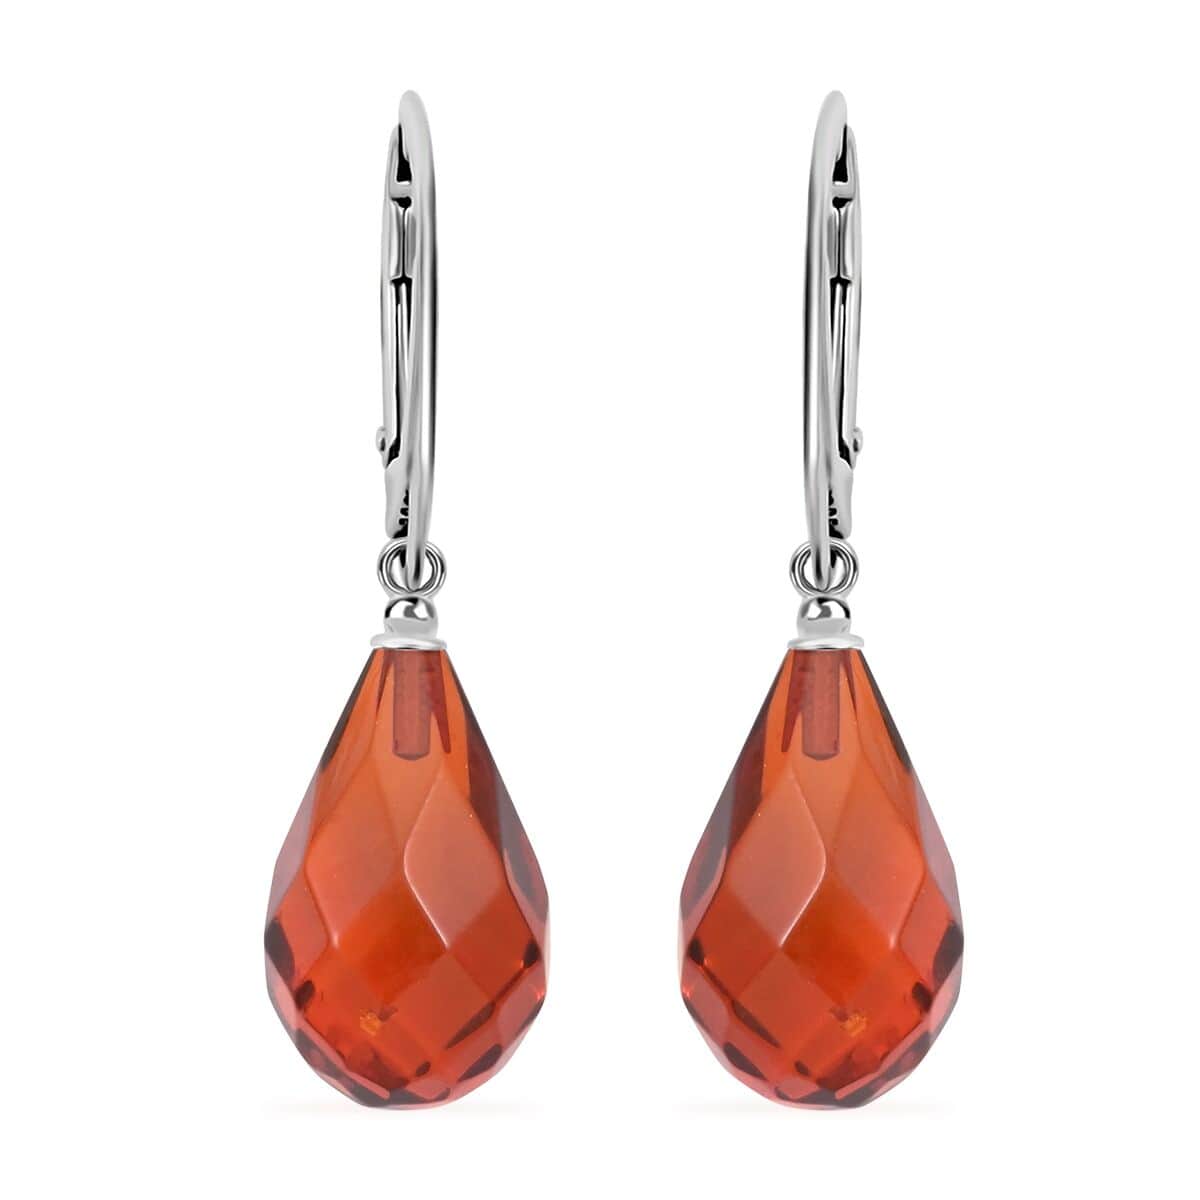 Buy Baltic Amber Earrings in Sterling Silver at ShopLC.